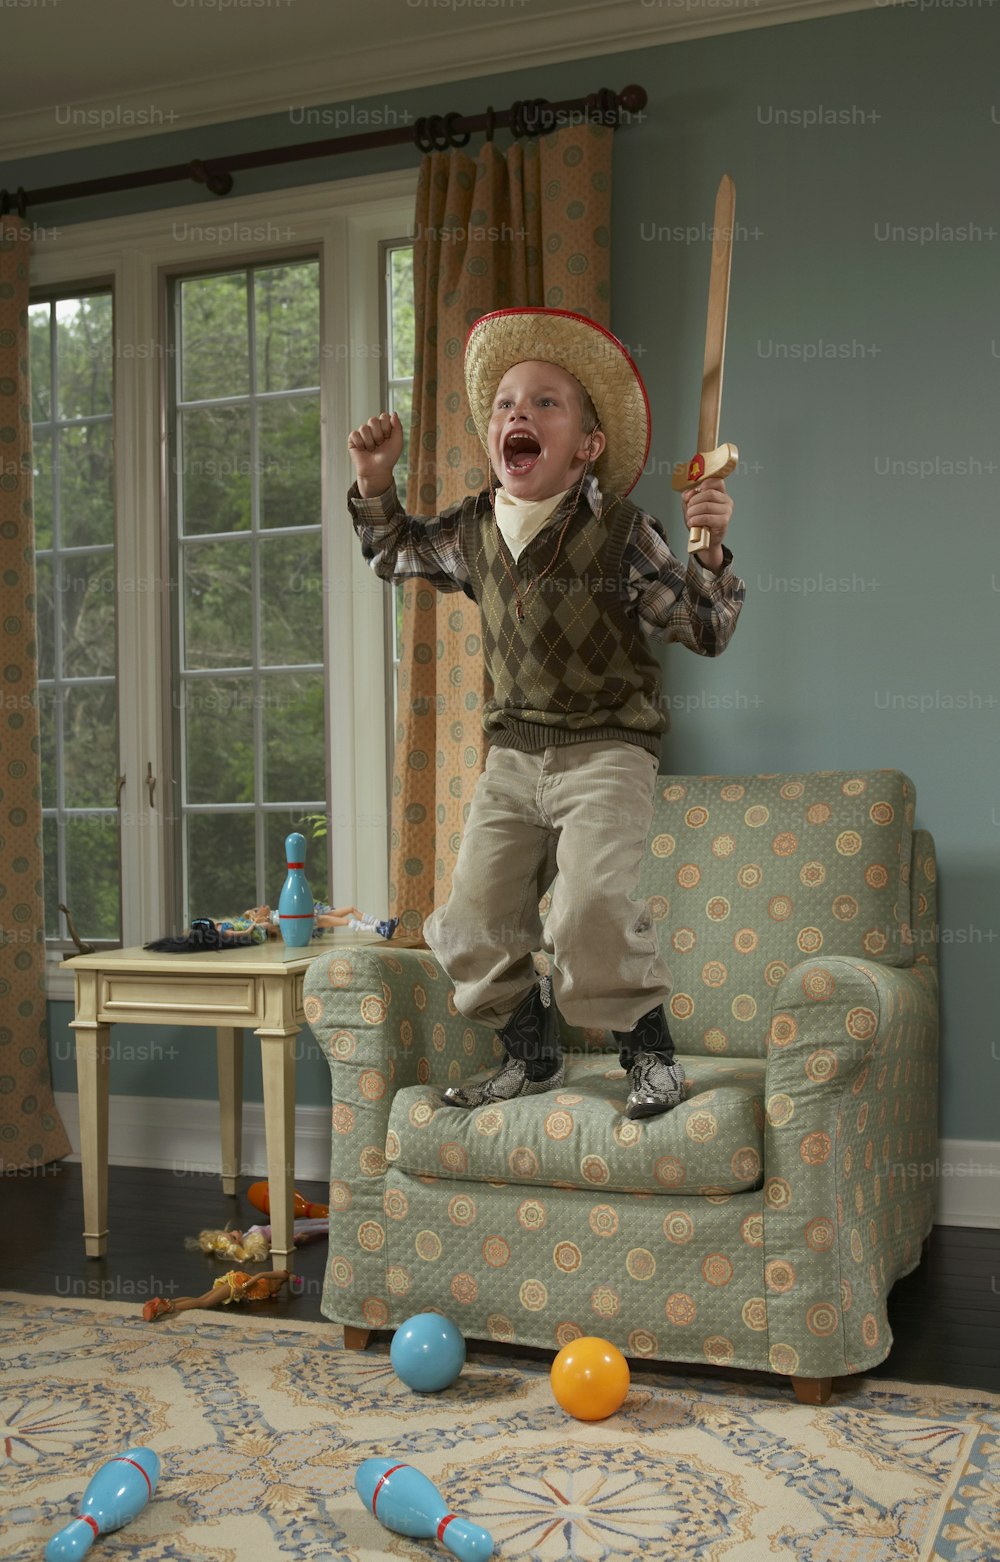 a little boy in a cowboy hat jumping on a couch